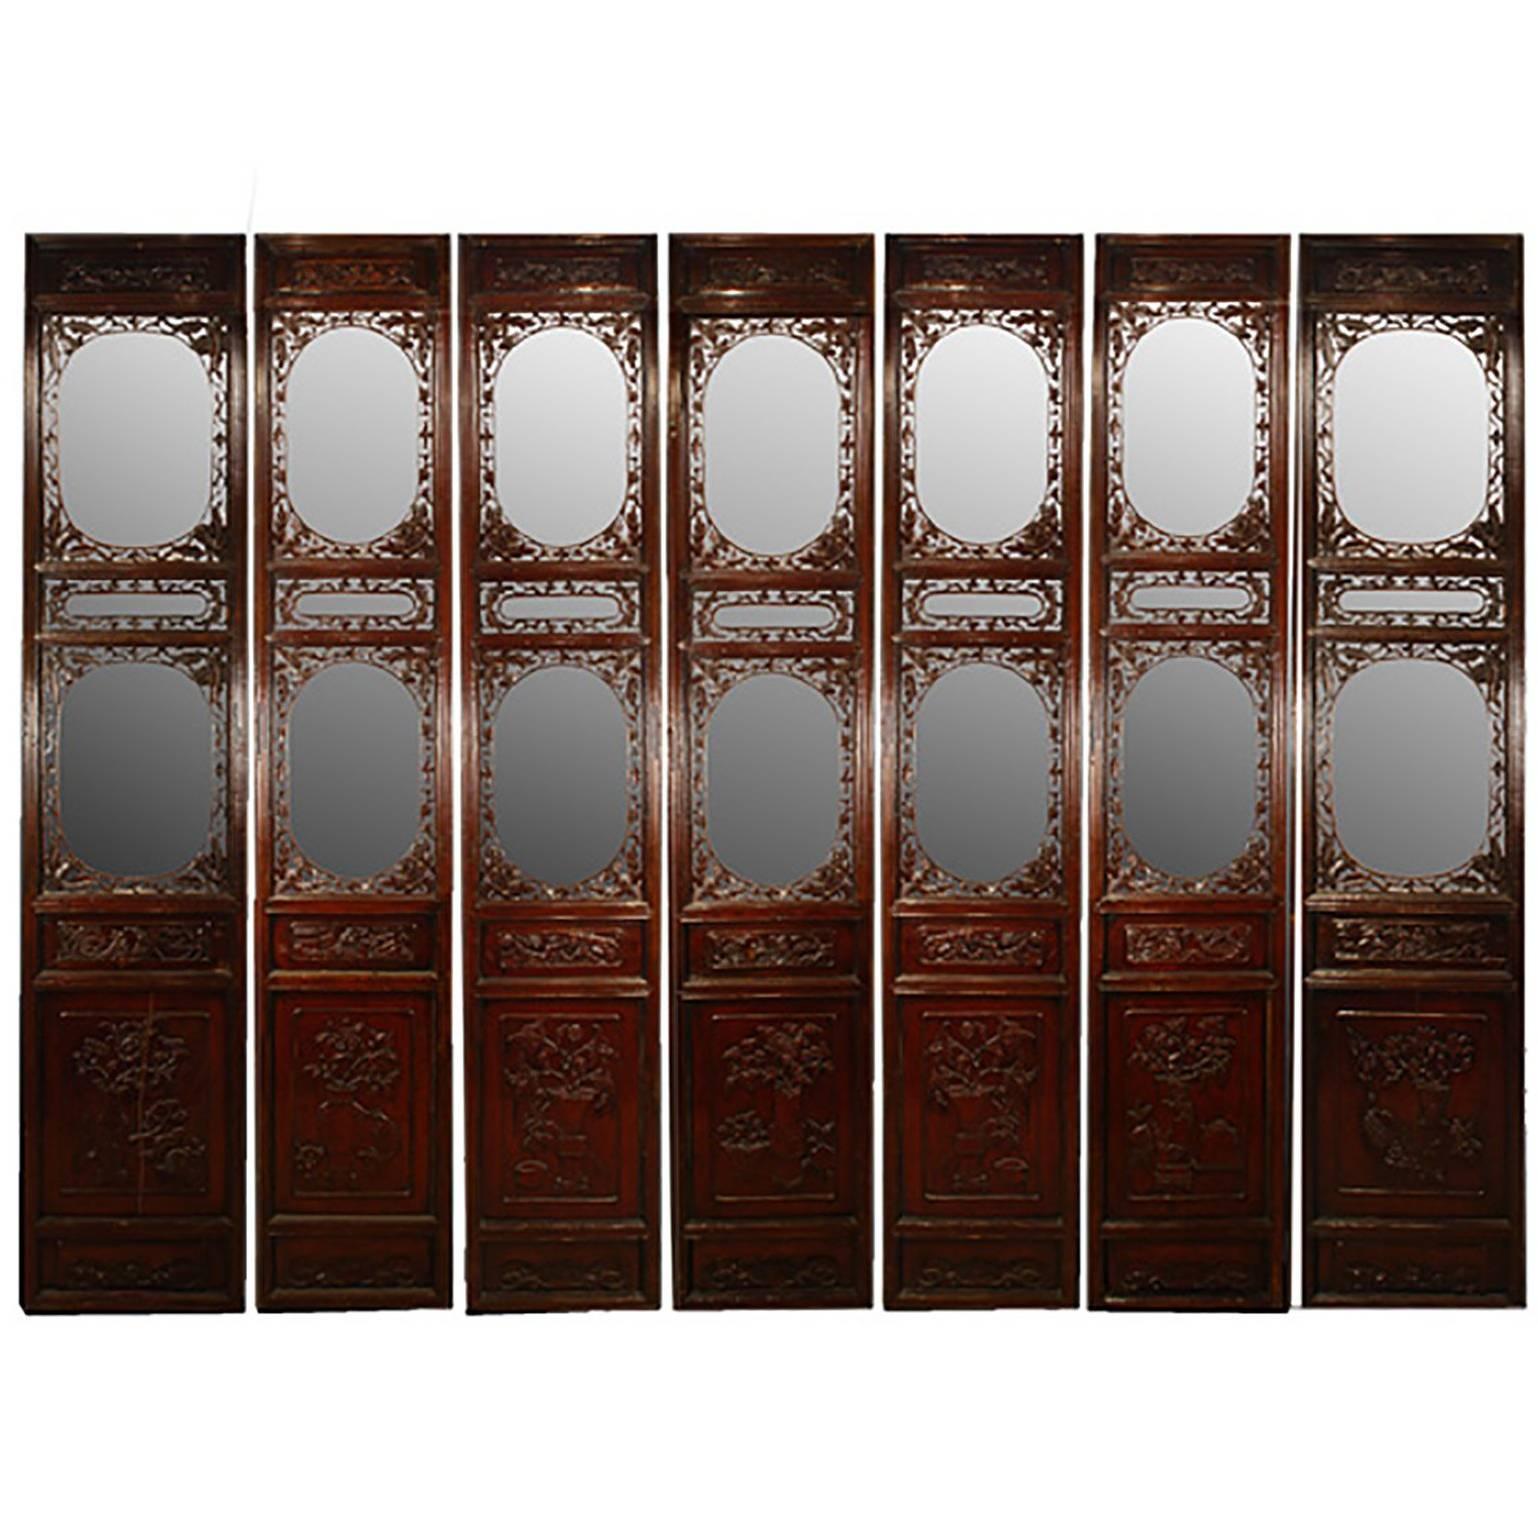 Set of Seven Chinese Mirrored Courtyard Panels